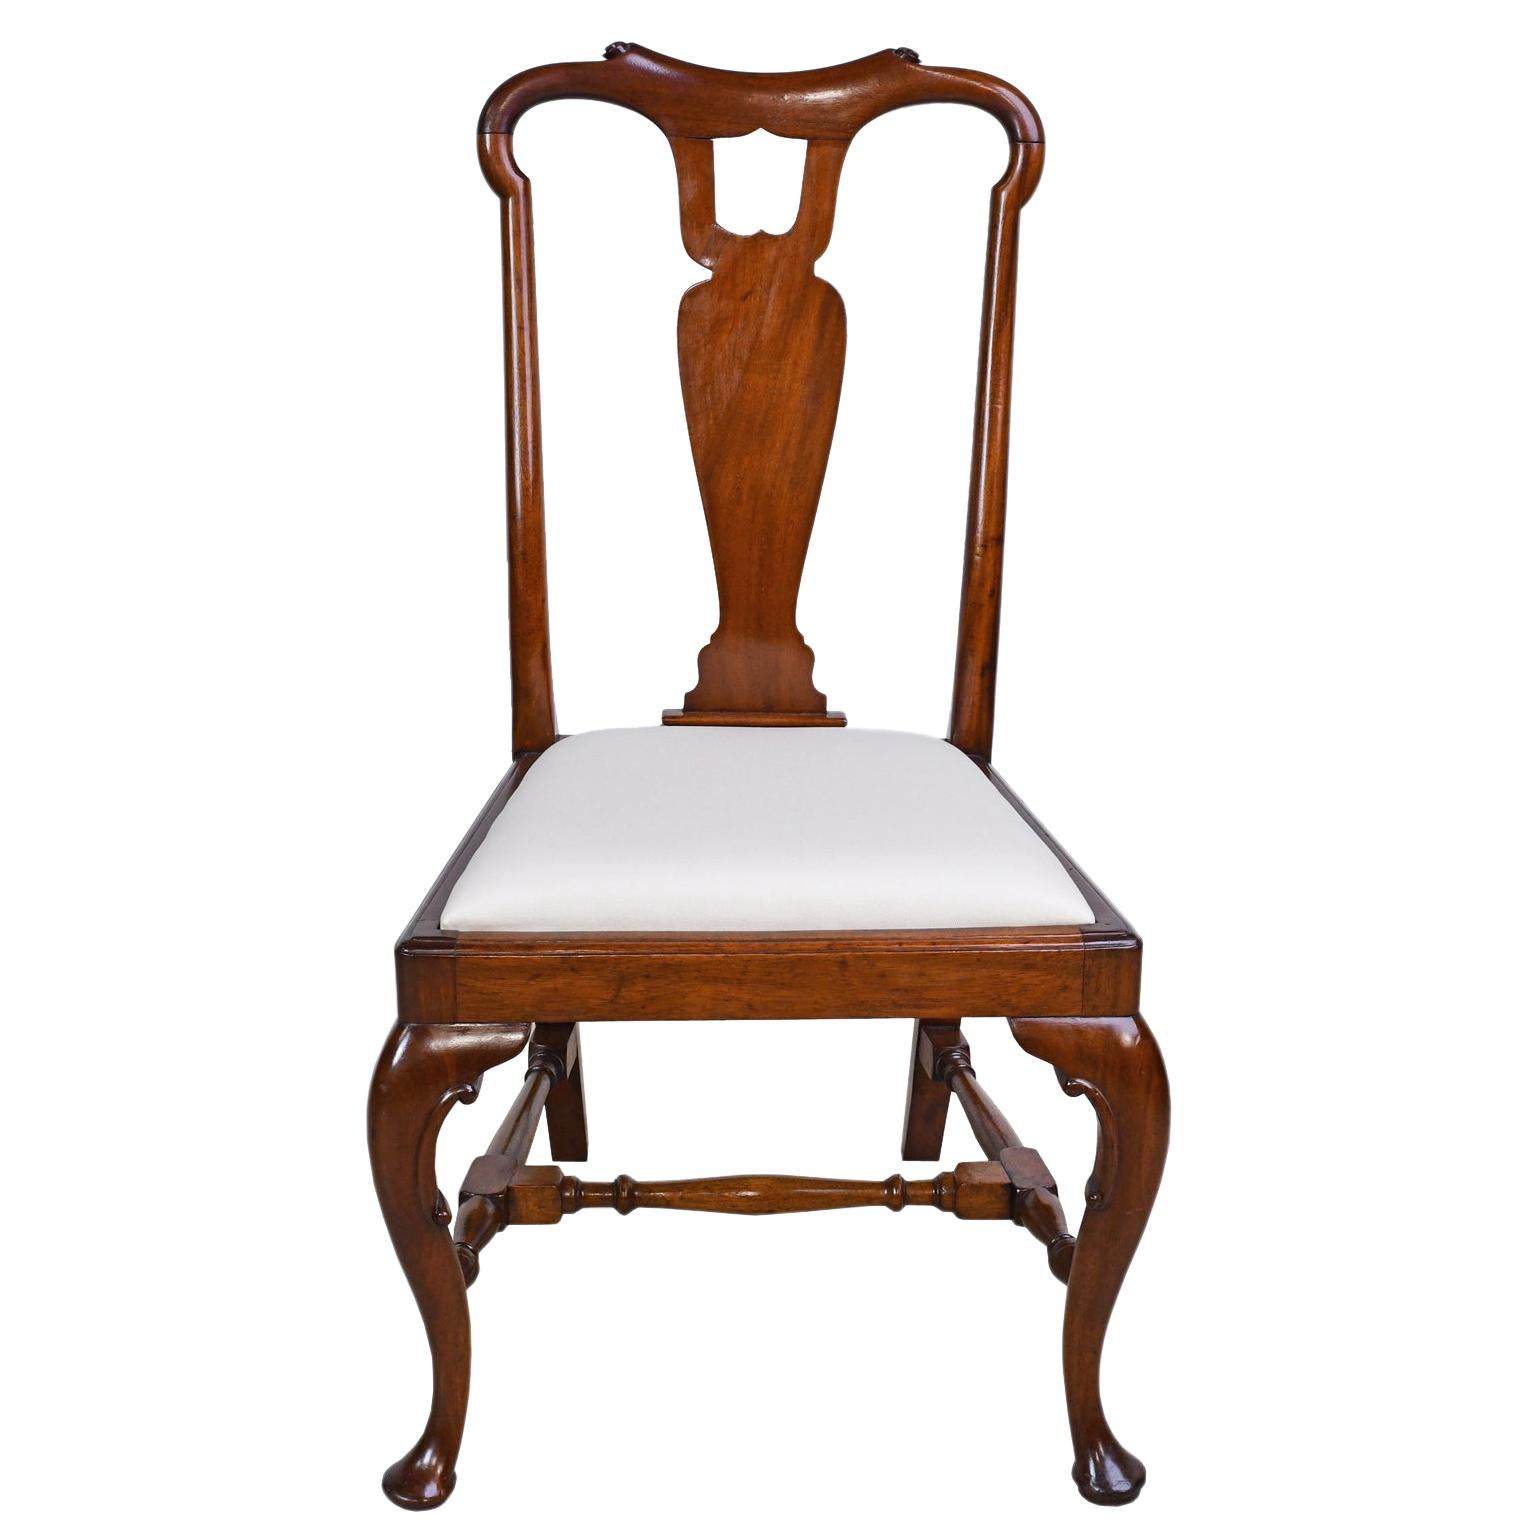 Queen Anne-Style Fiddle-Back Chair in Mahogany w/ Upholstered Slip Seat, c 1880